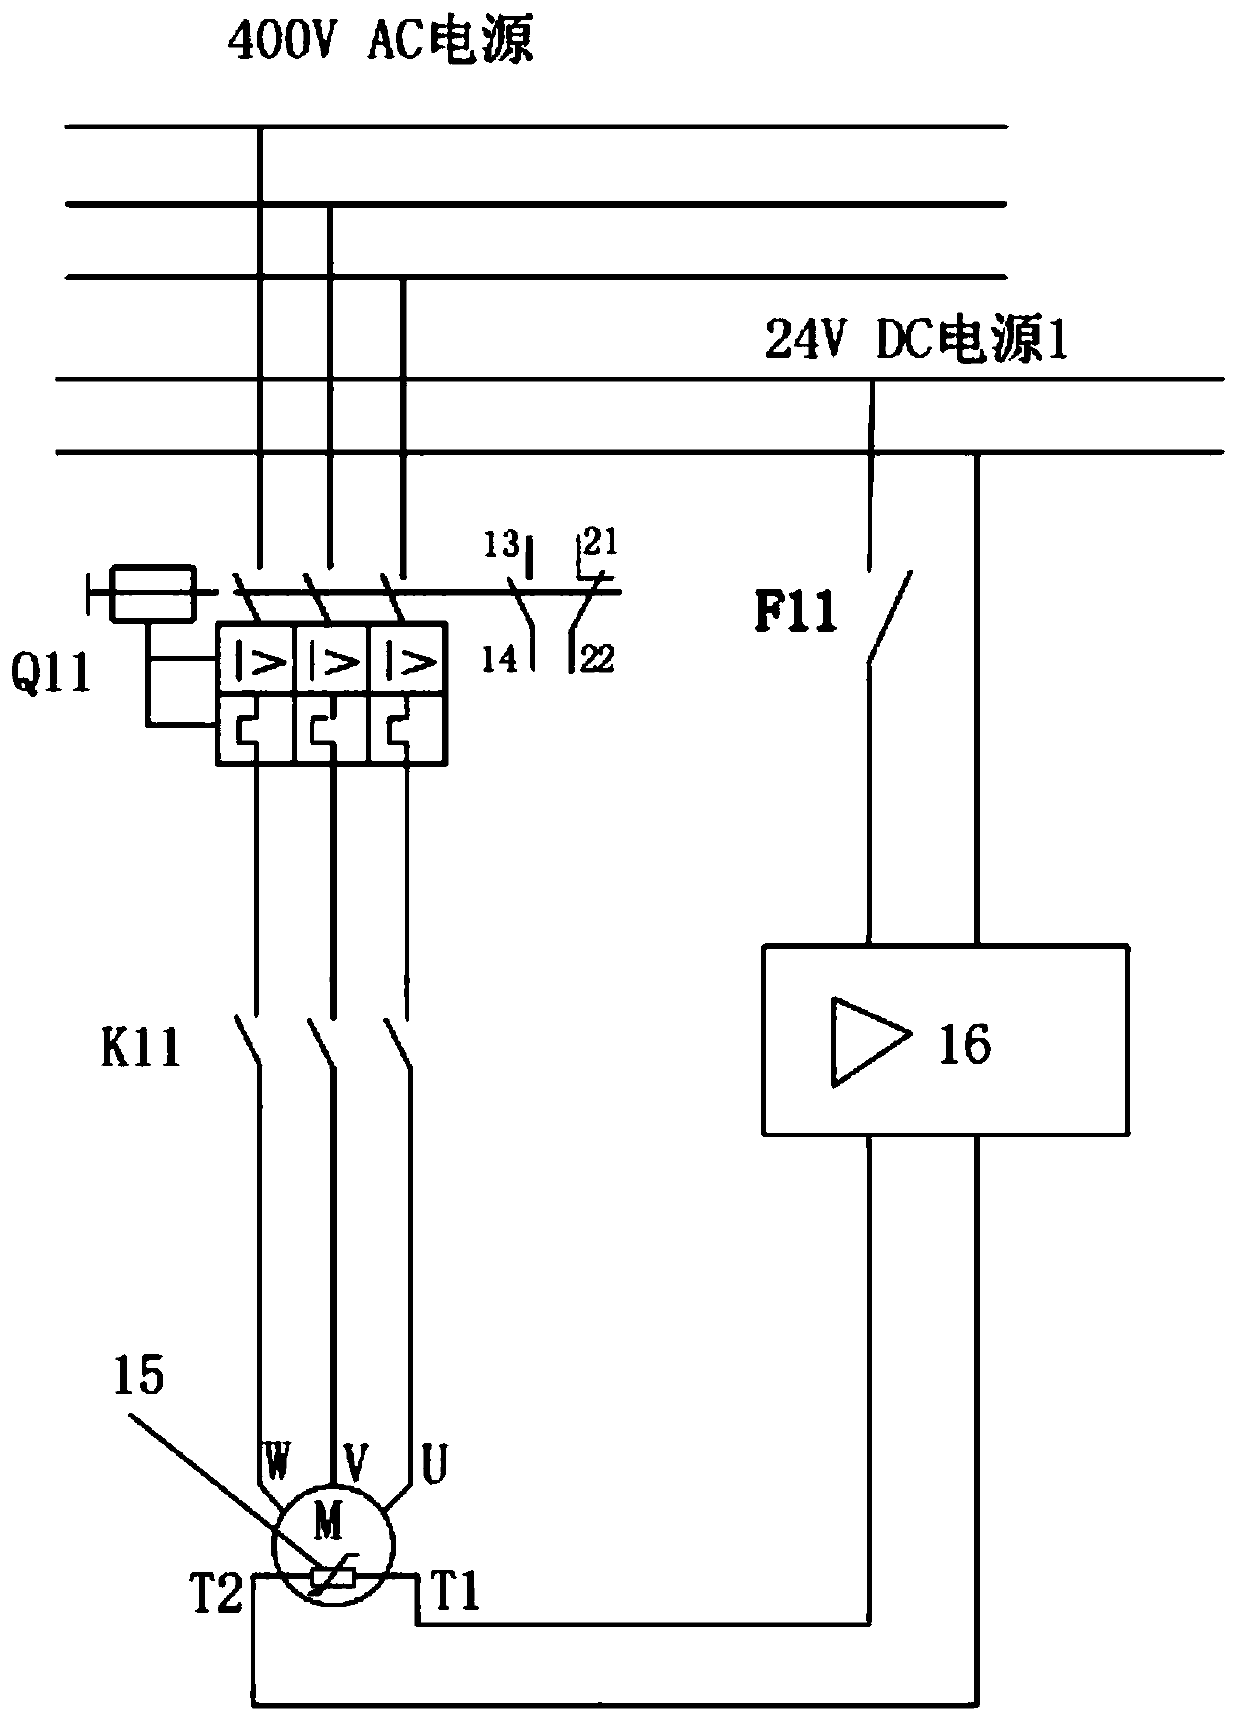 Motor thermosensitive control system of high-voltage direct-current valve cooling system